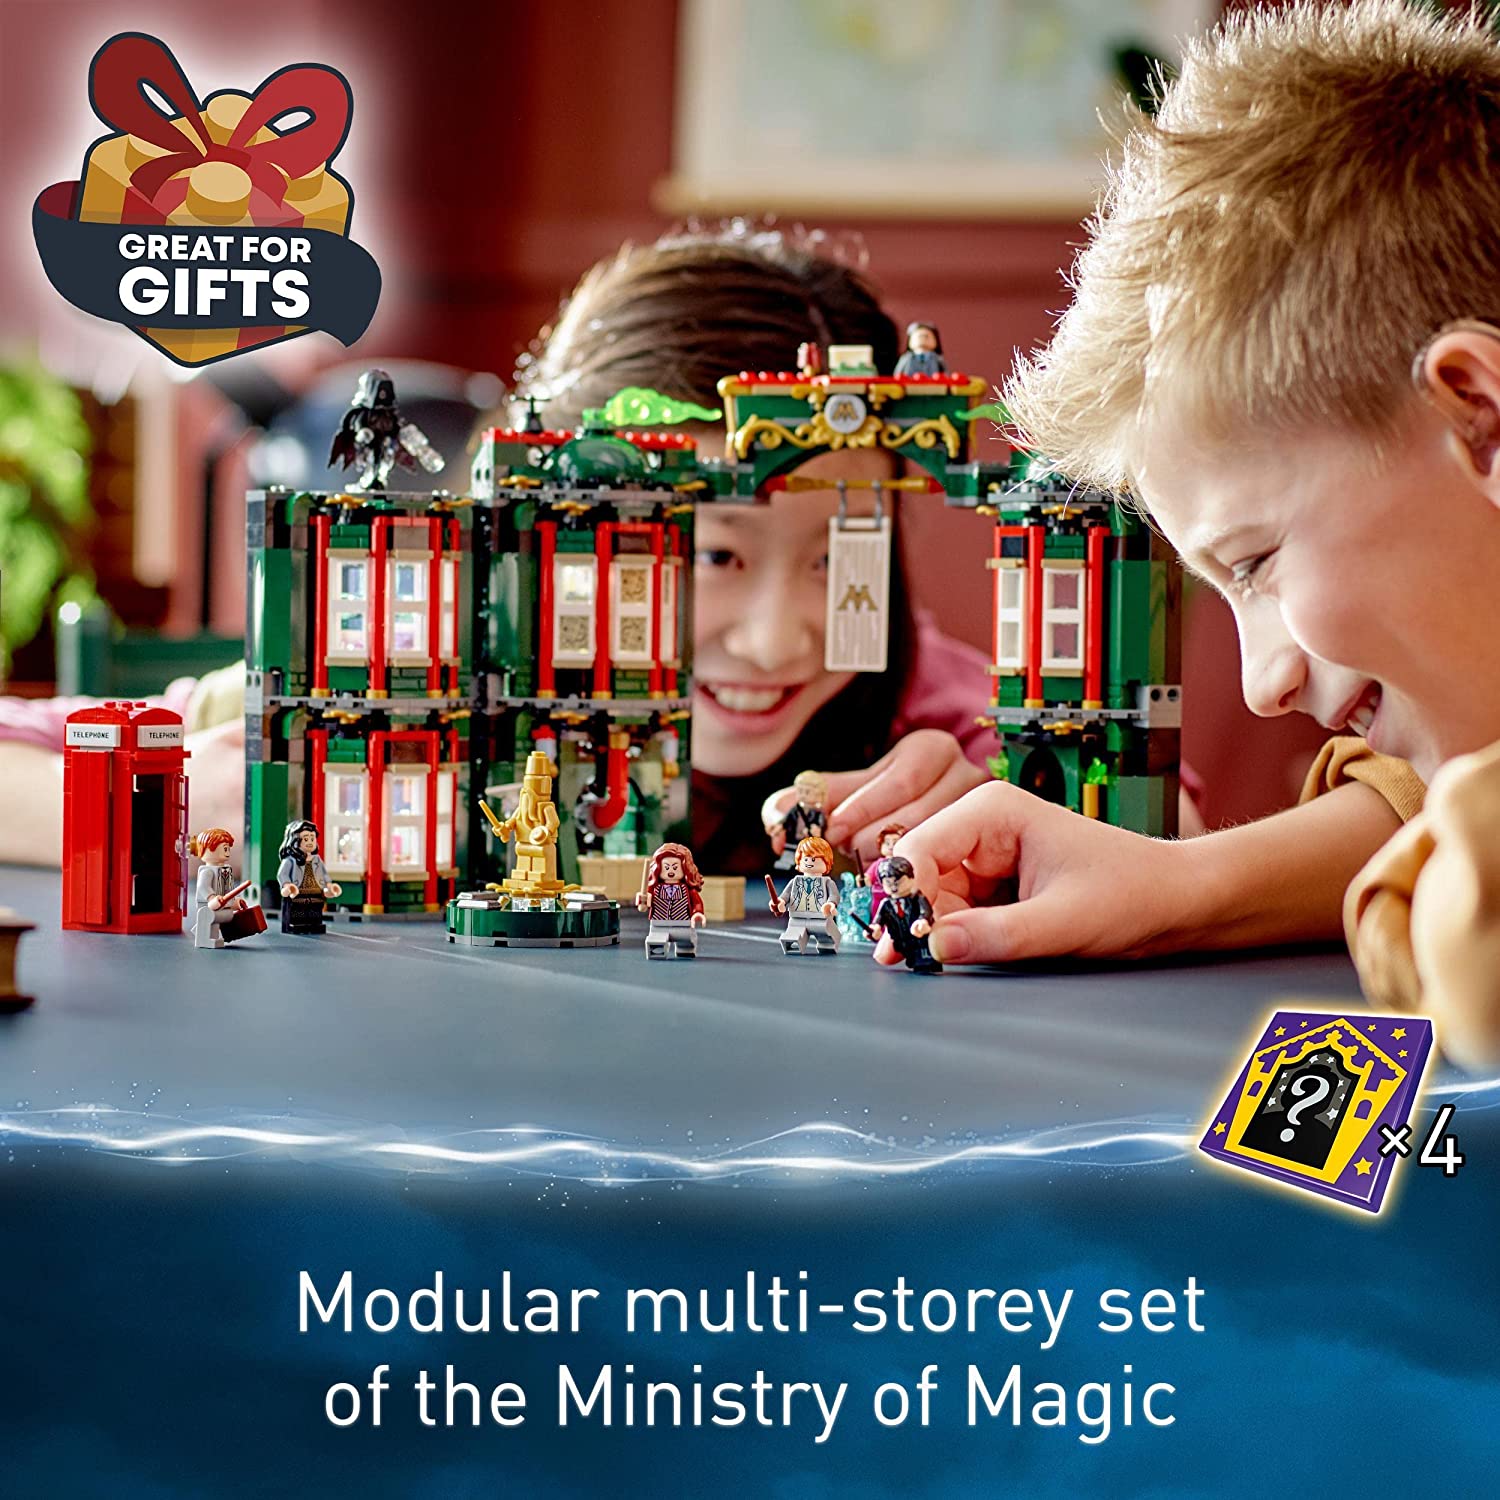 Lego 76403 Harry Potter The Ministry of Magic Modular Set - New